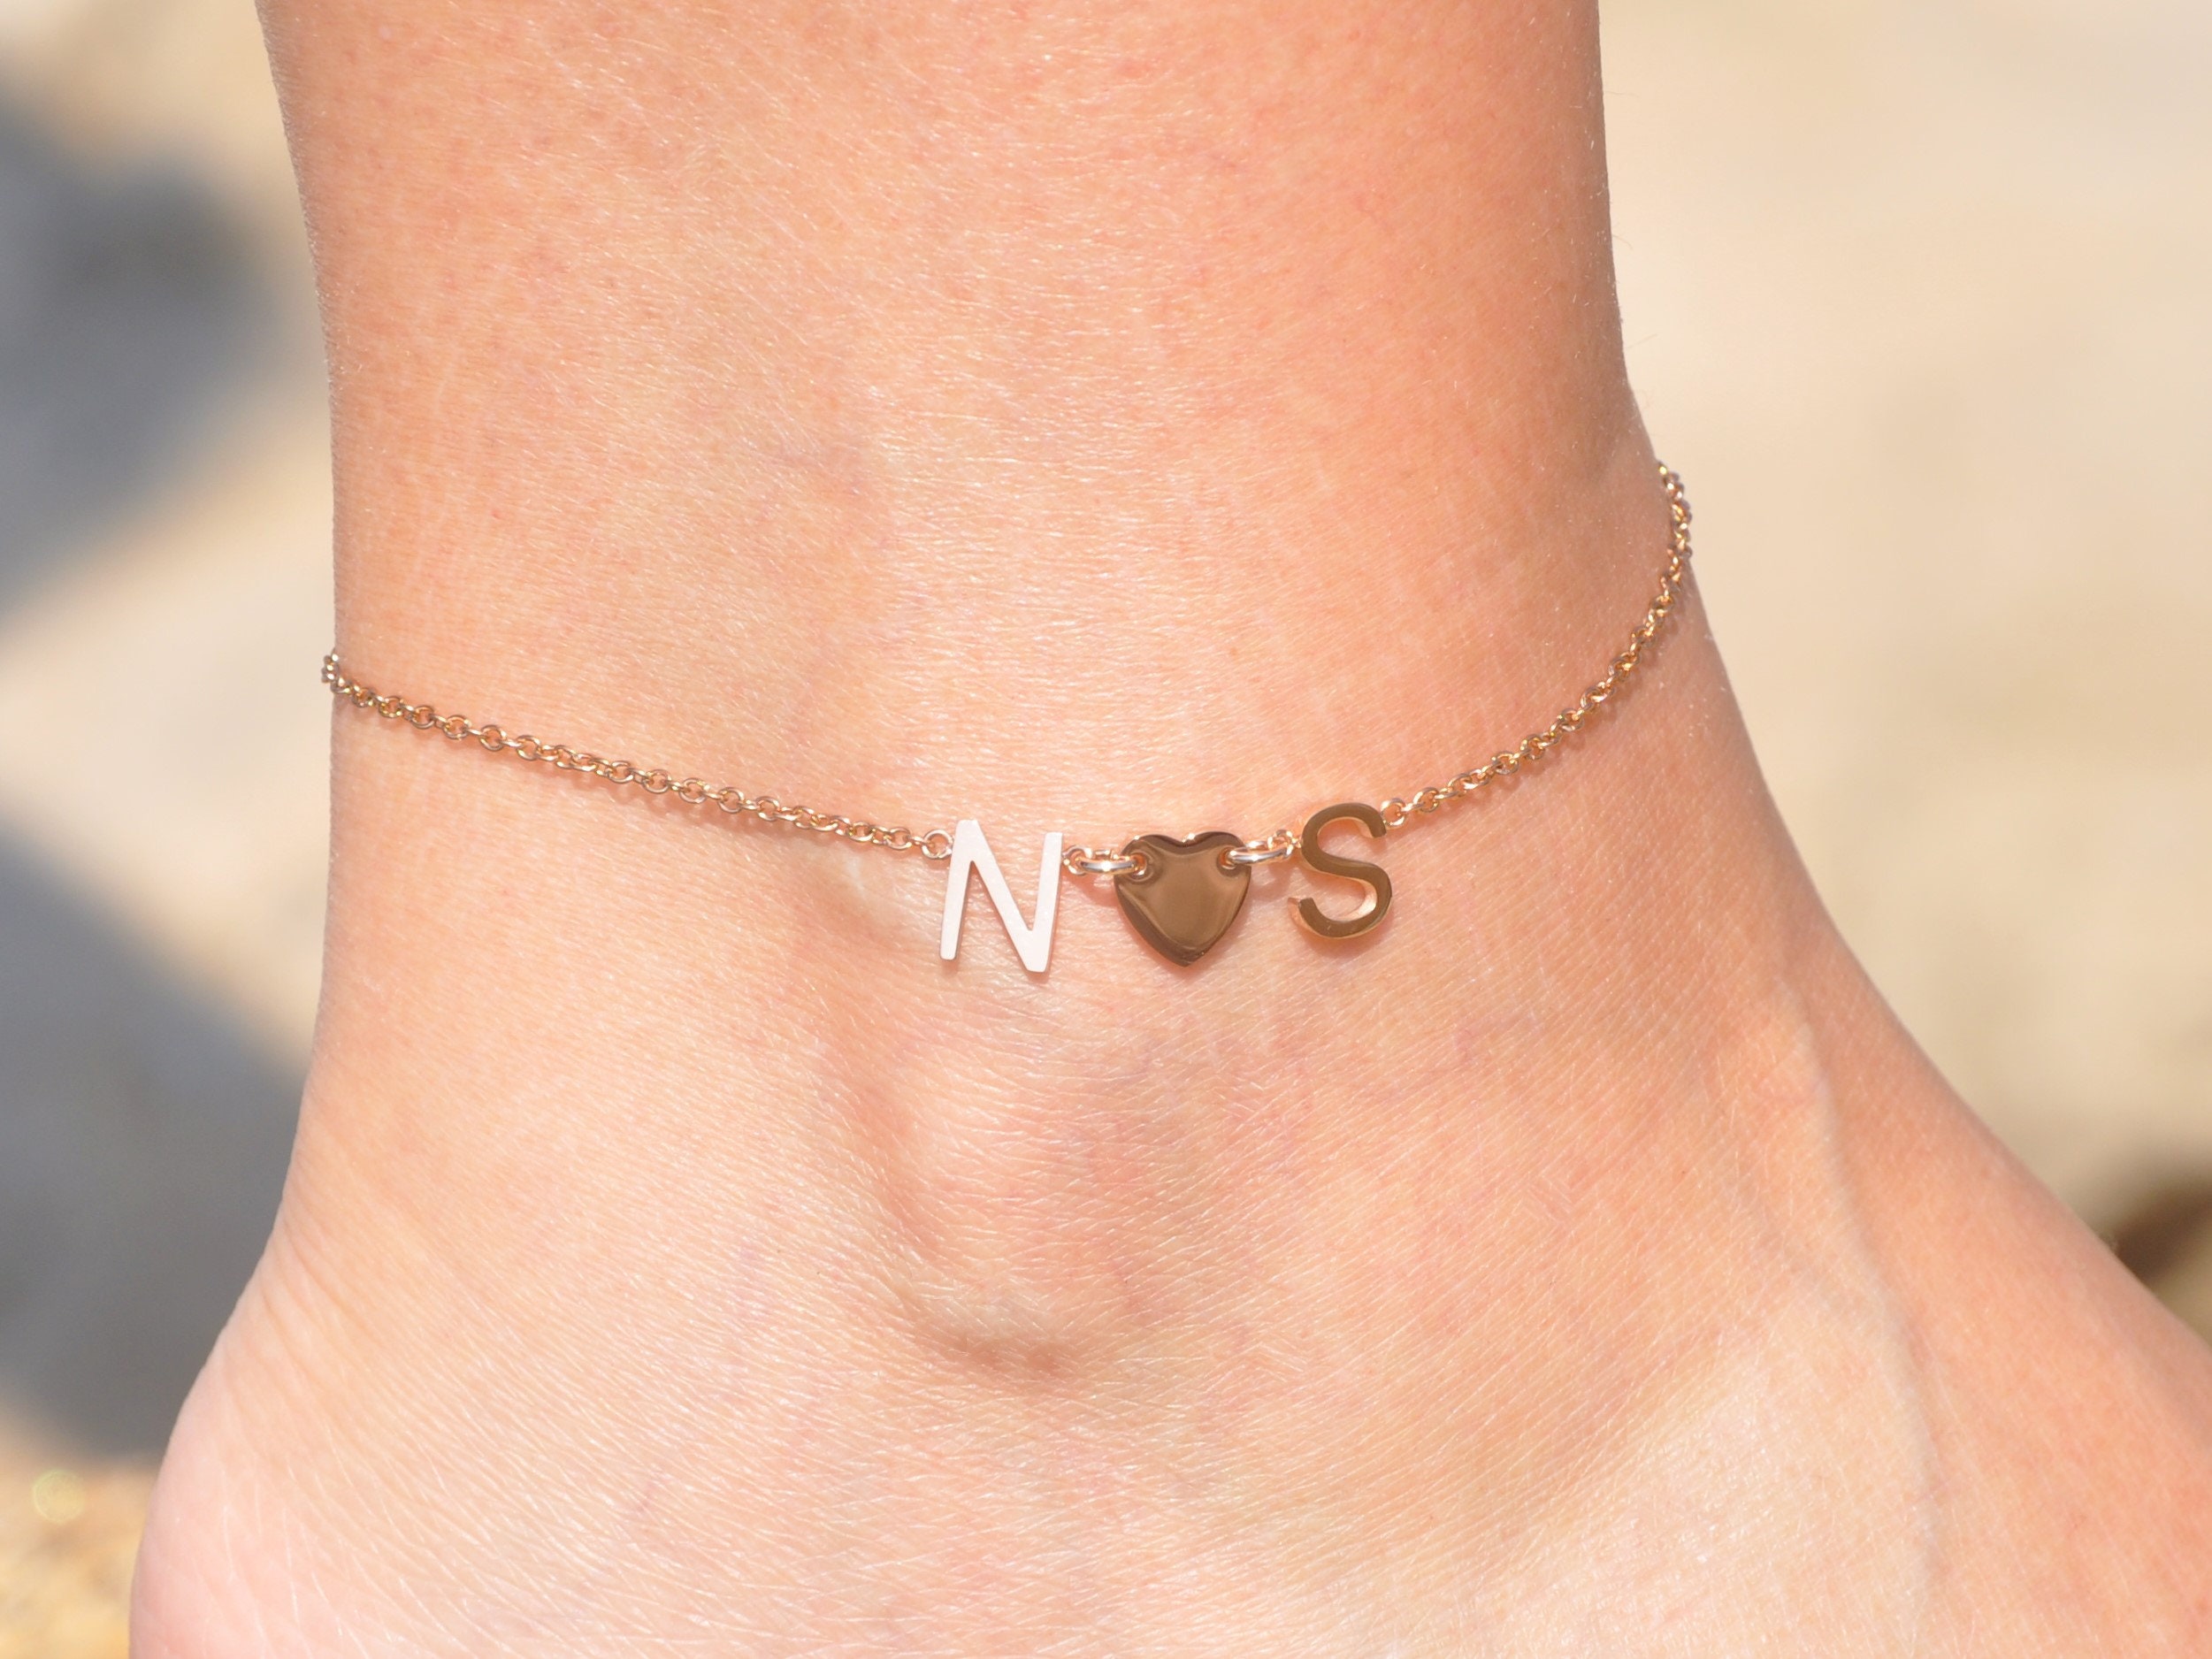 V Attract Personalized Name Anklet Bracelet Best Friends Beach Jewelry  Graduation Gift Rose Gold Custom Name Foot Tornozeleira  Customized Anklets   AliExpress